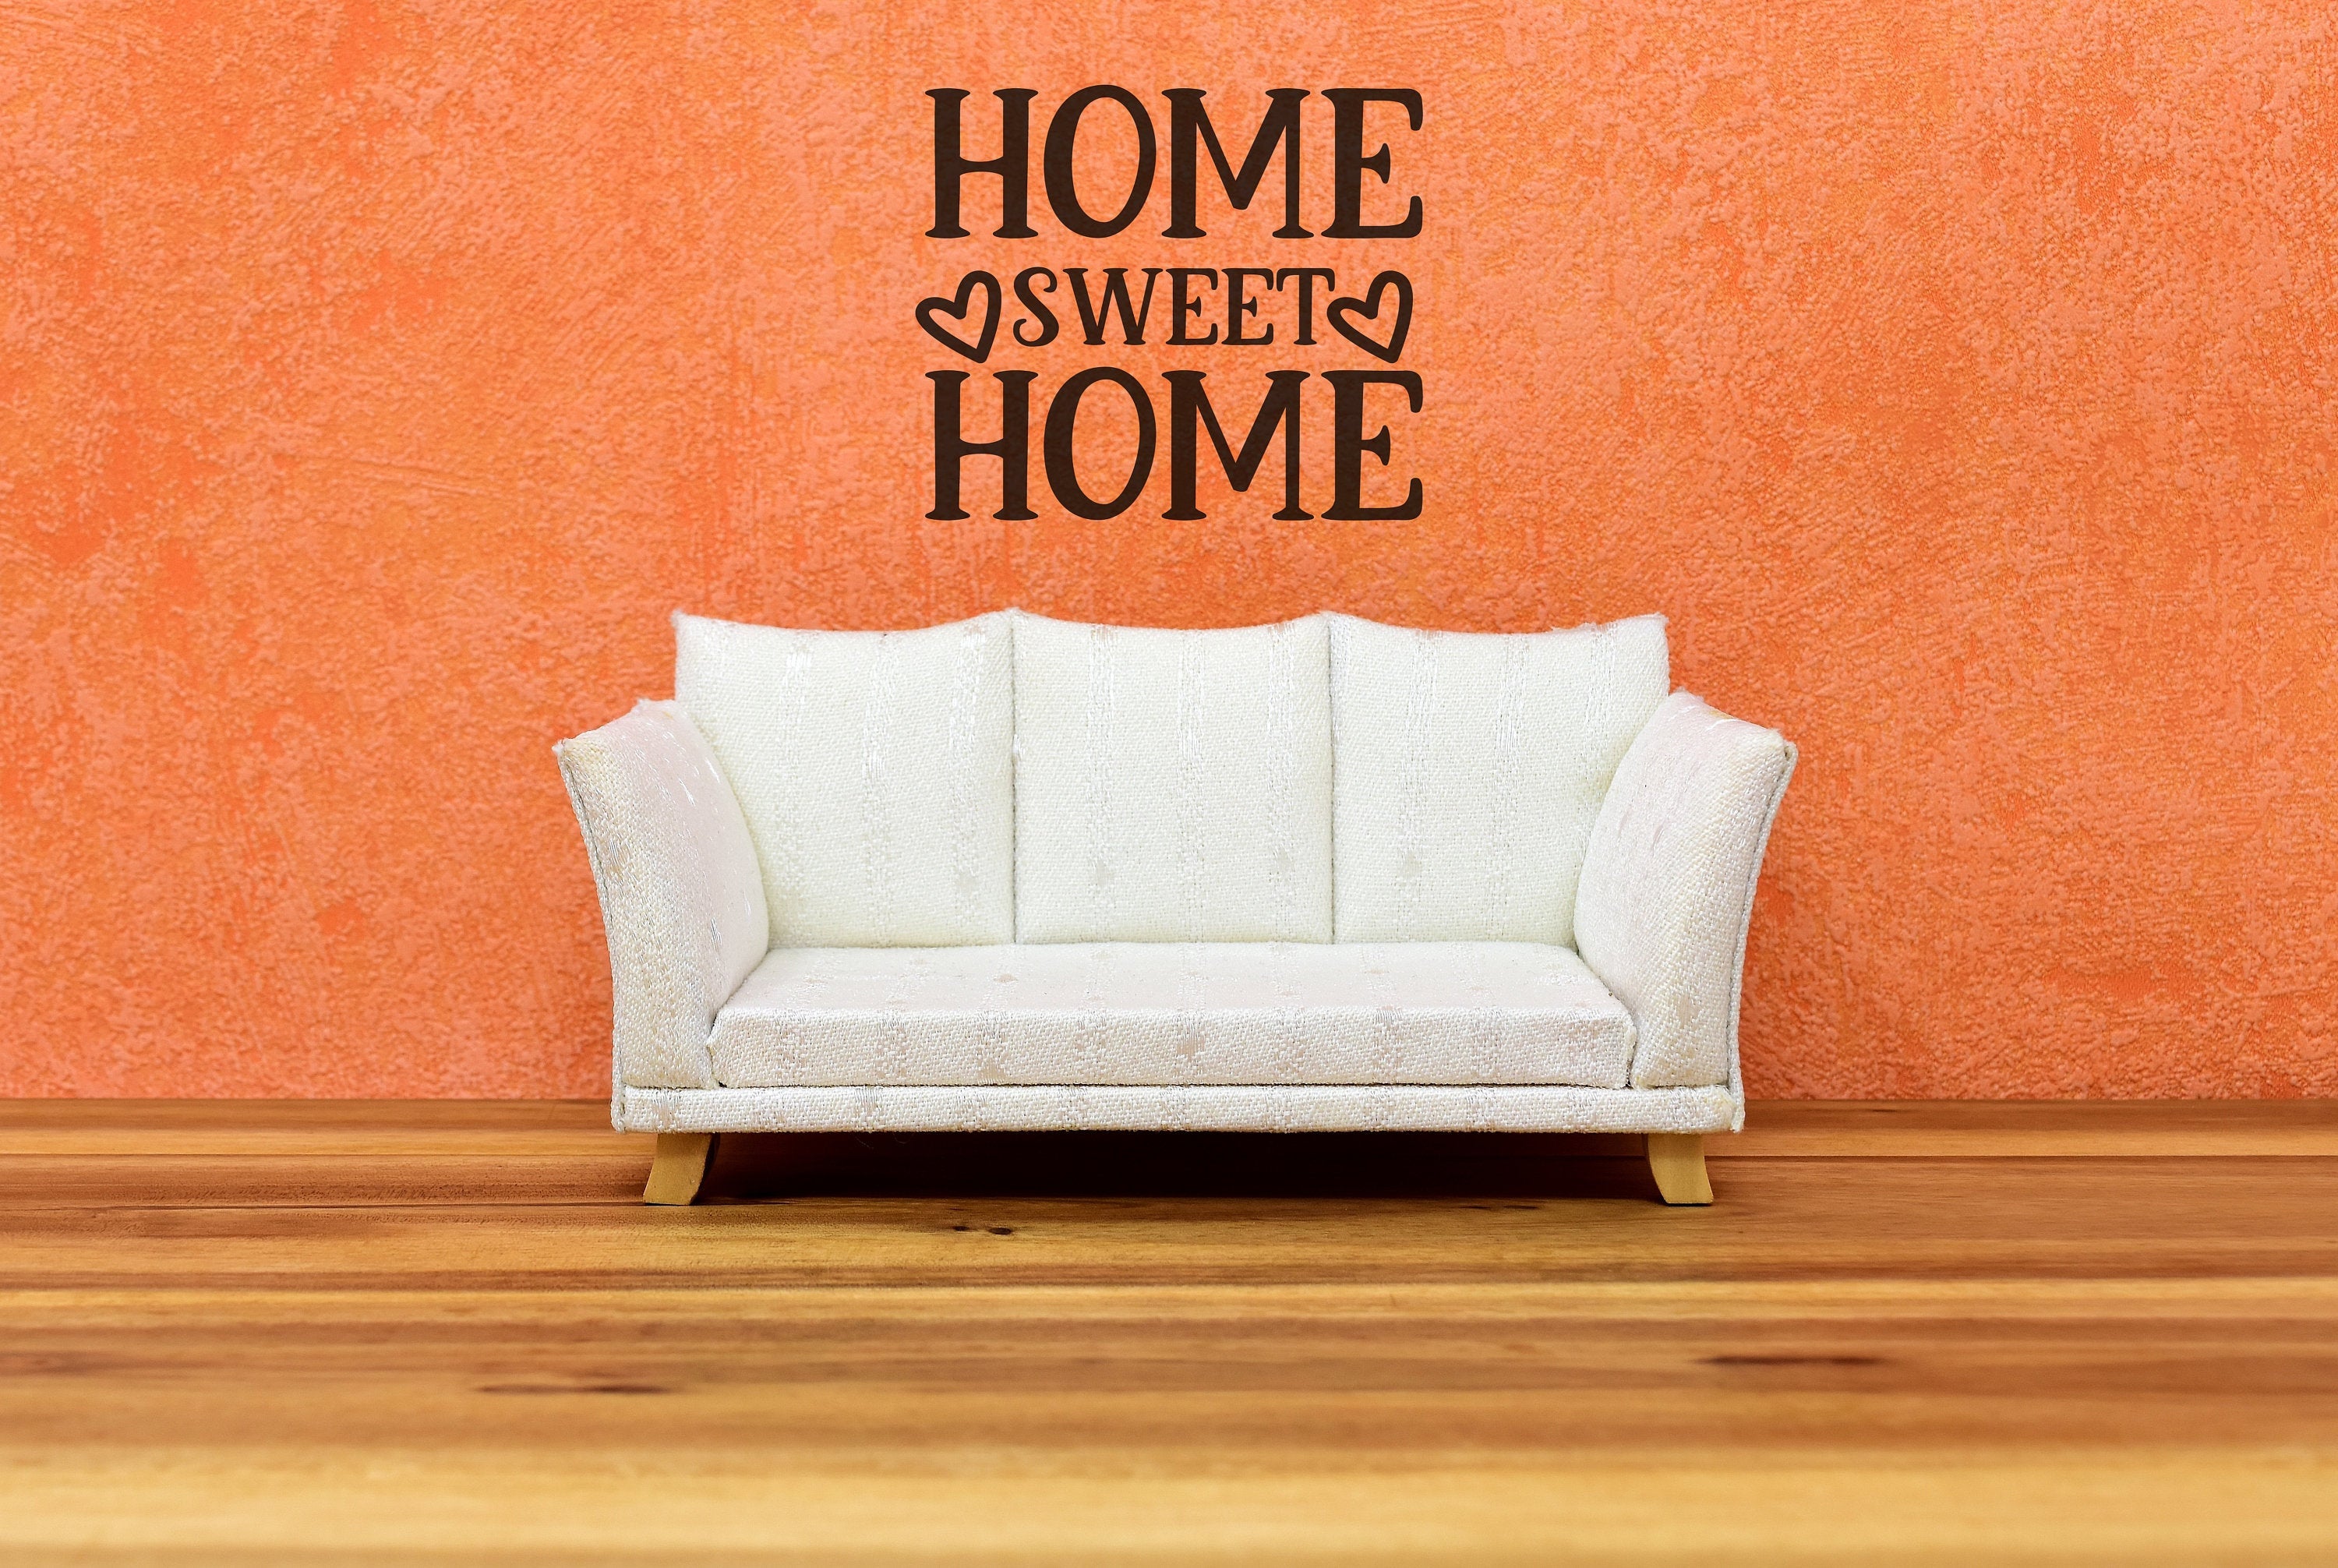 Home Sweet Home - Vinyl Wall Decal - Home Decor for Walls, Doors, Entryway, Great as Housewarming Gift or Present,